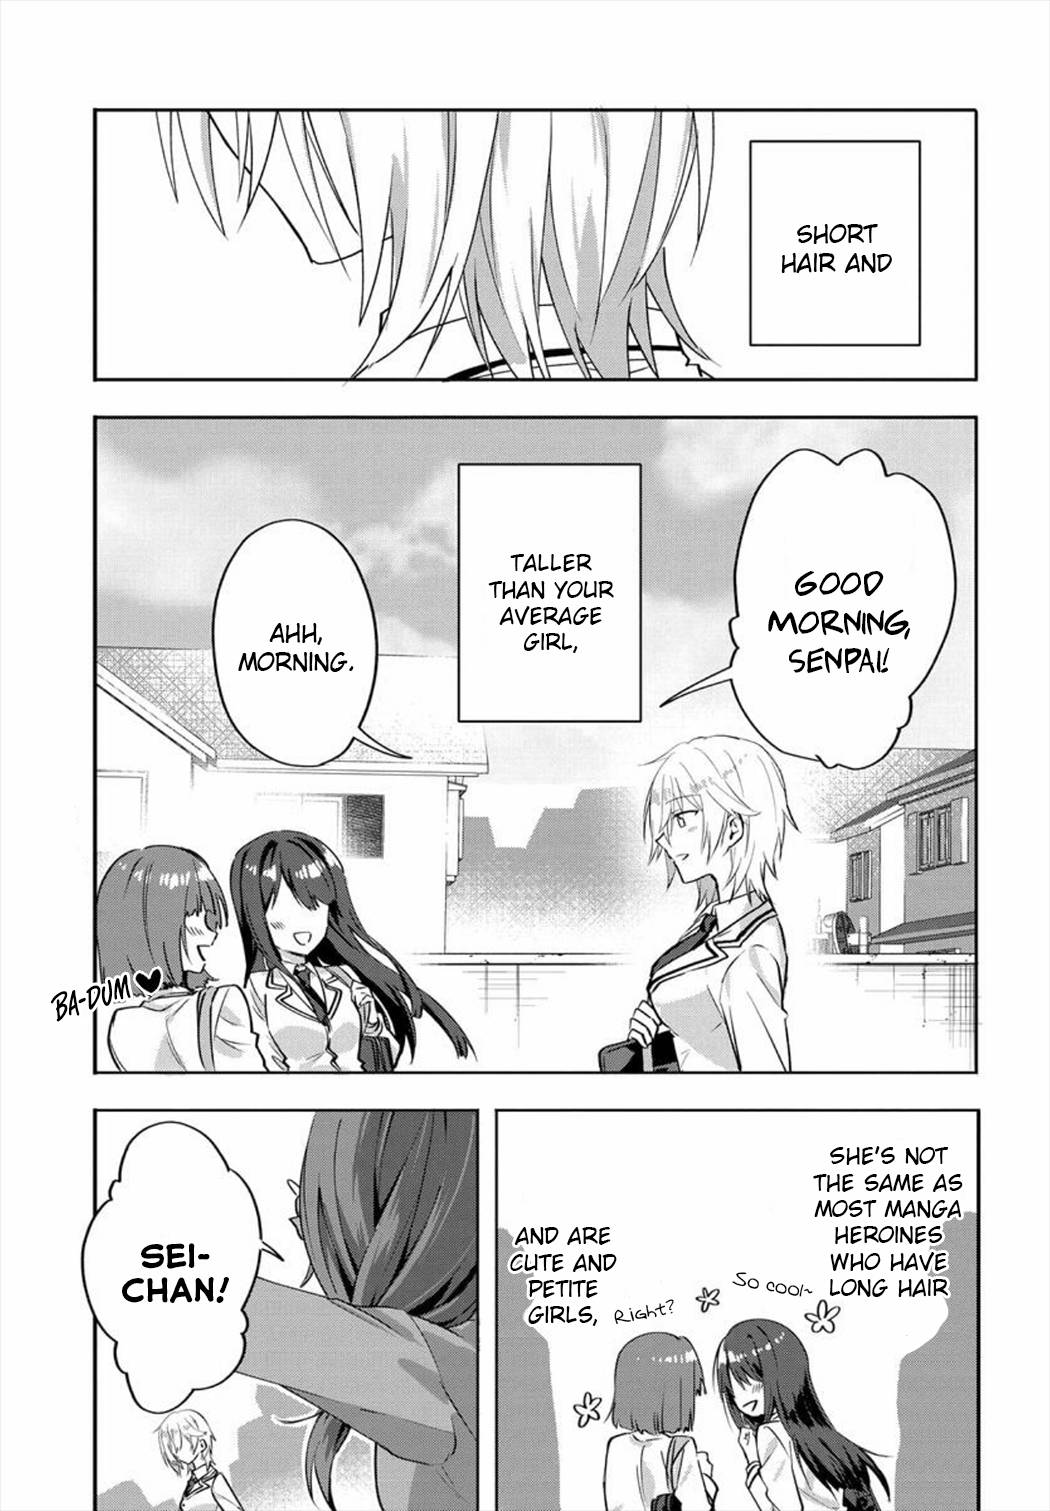 Since I’Ve Entered The World Of Romantic Comedy Manga, I’Ll Do My Best To Make The Losing Heroine Happy - chapter 2.1 - #3